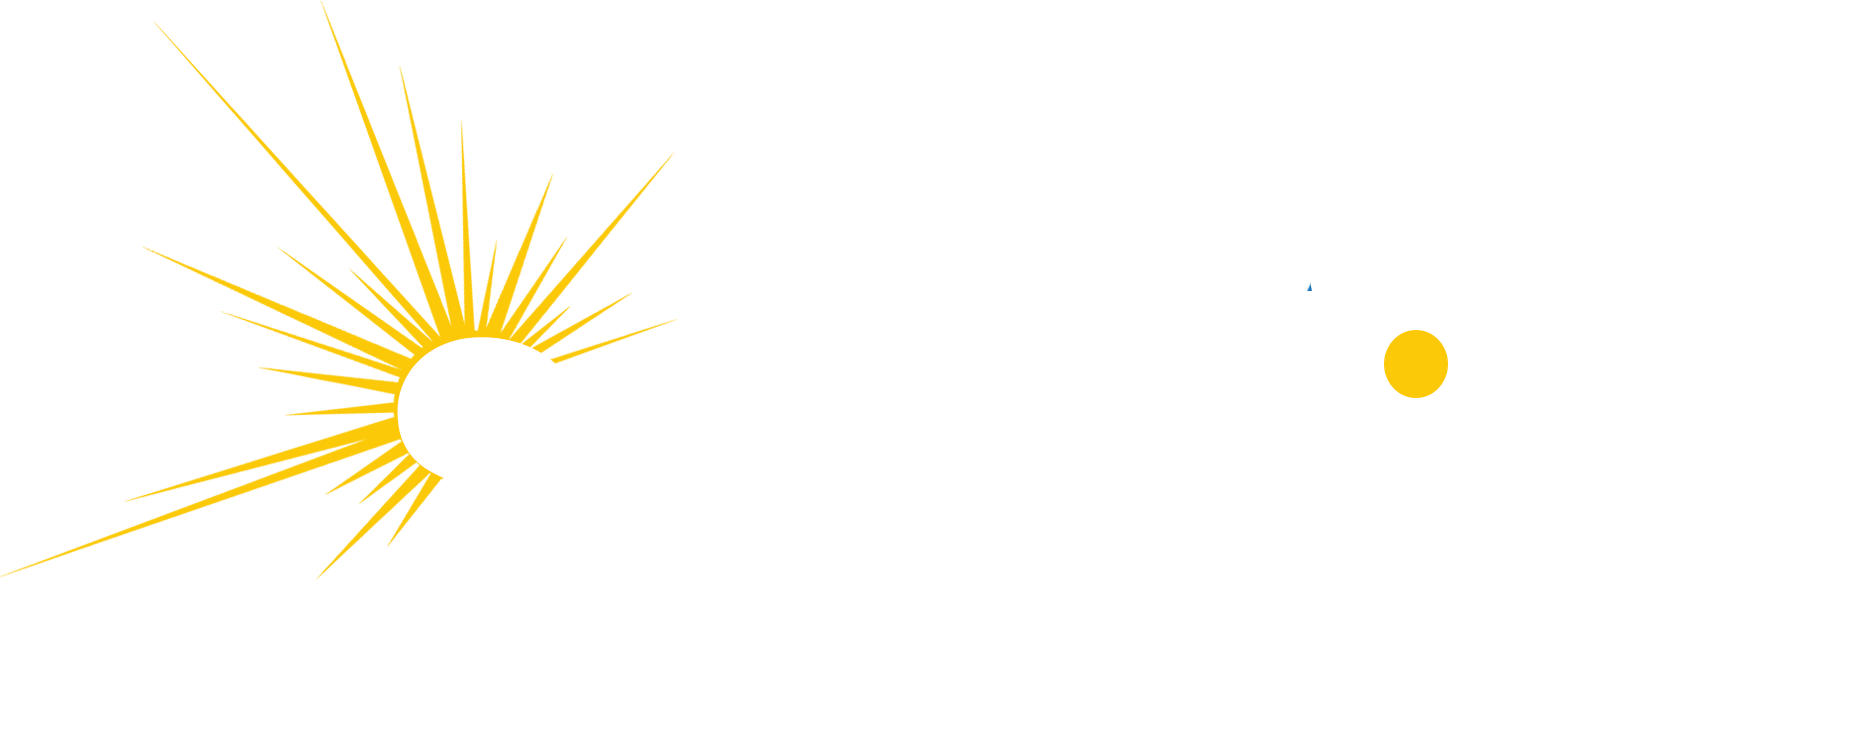 Sunshine Errands and Cleaning Services LLC - Lee's Summit Missouri